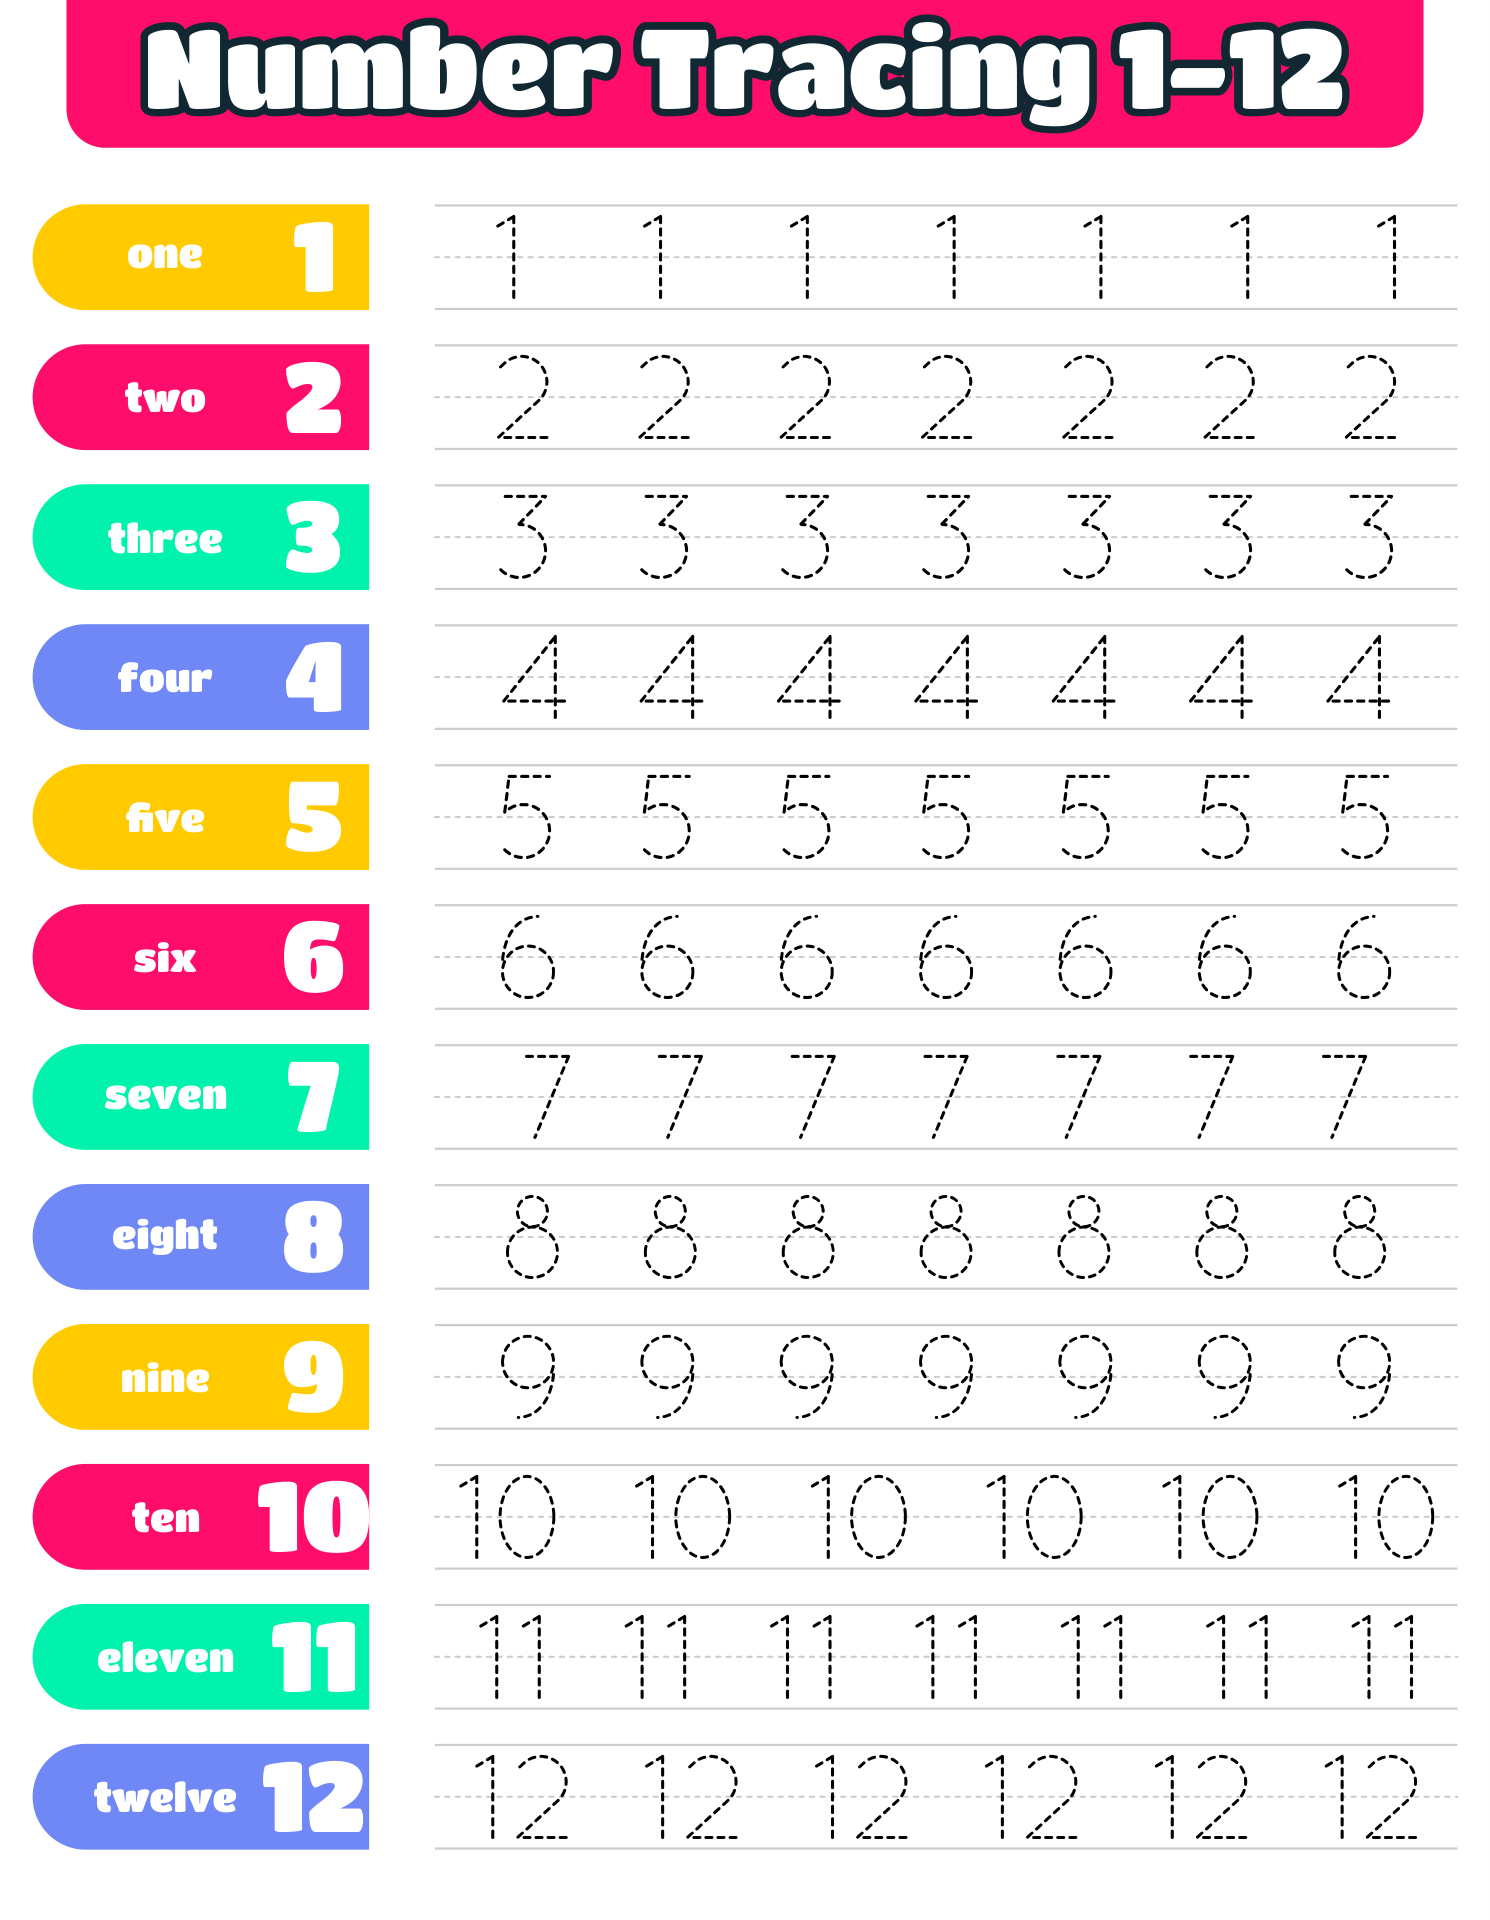 5 Best Images of Preschool Printables Number 12 - Cut and Paste